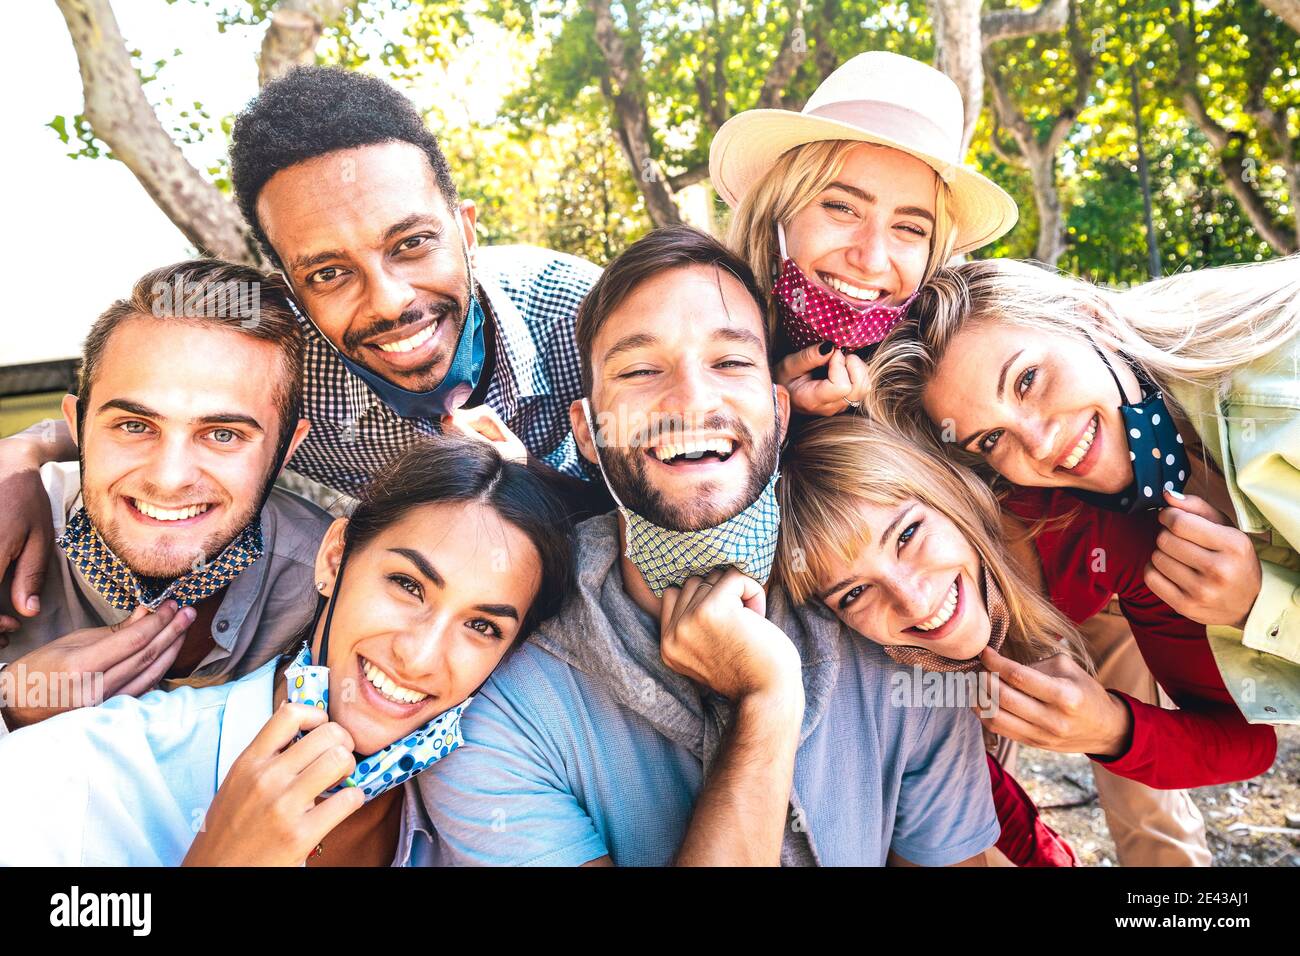 Multiracial friends taking happy selfie with open face masks after lockdown reopening - New normal friendship concept with young people having fun Stock Photo